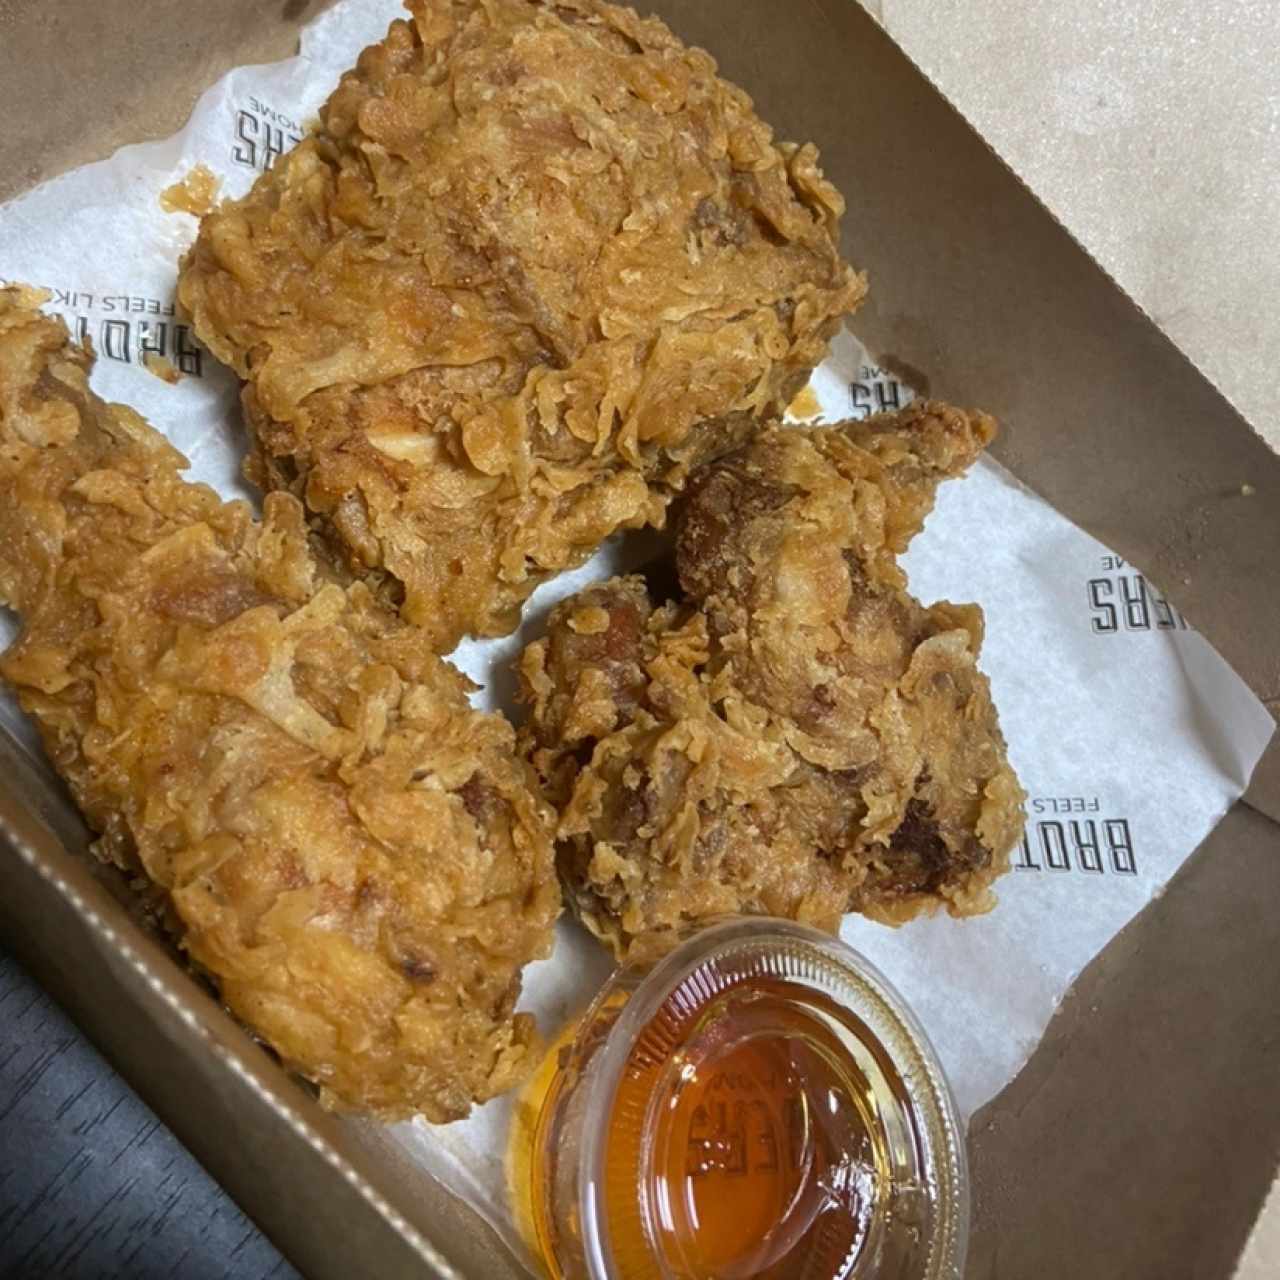 Specialty - Brothers Fried Chicken